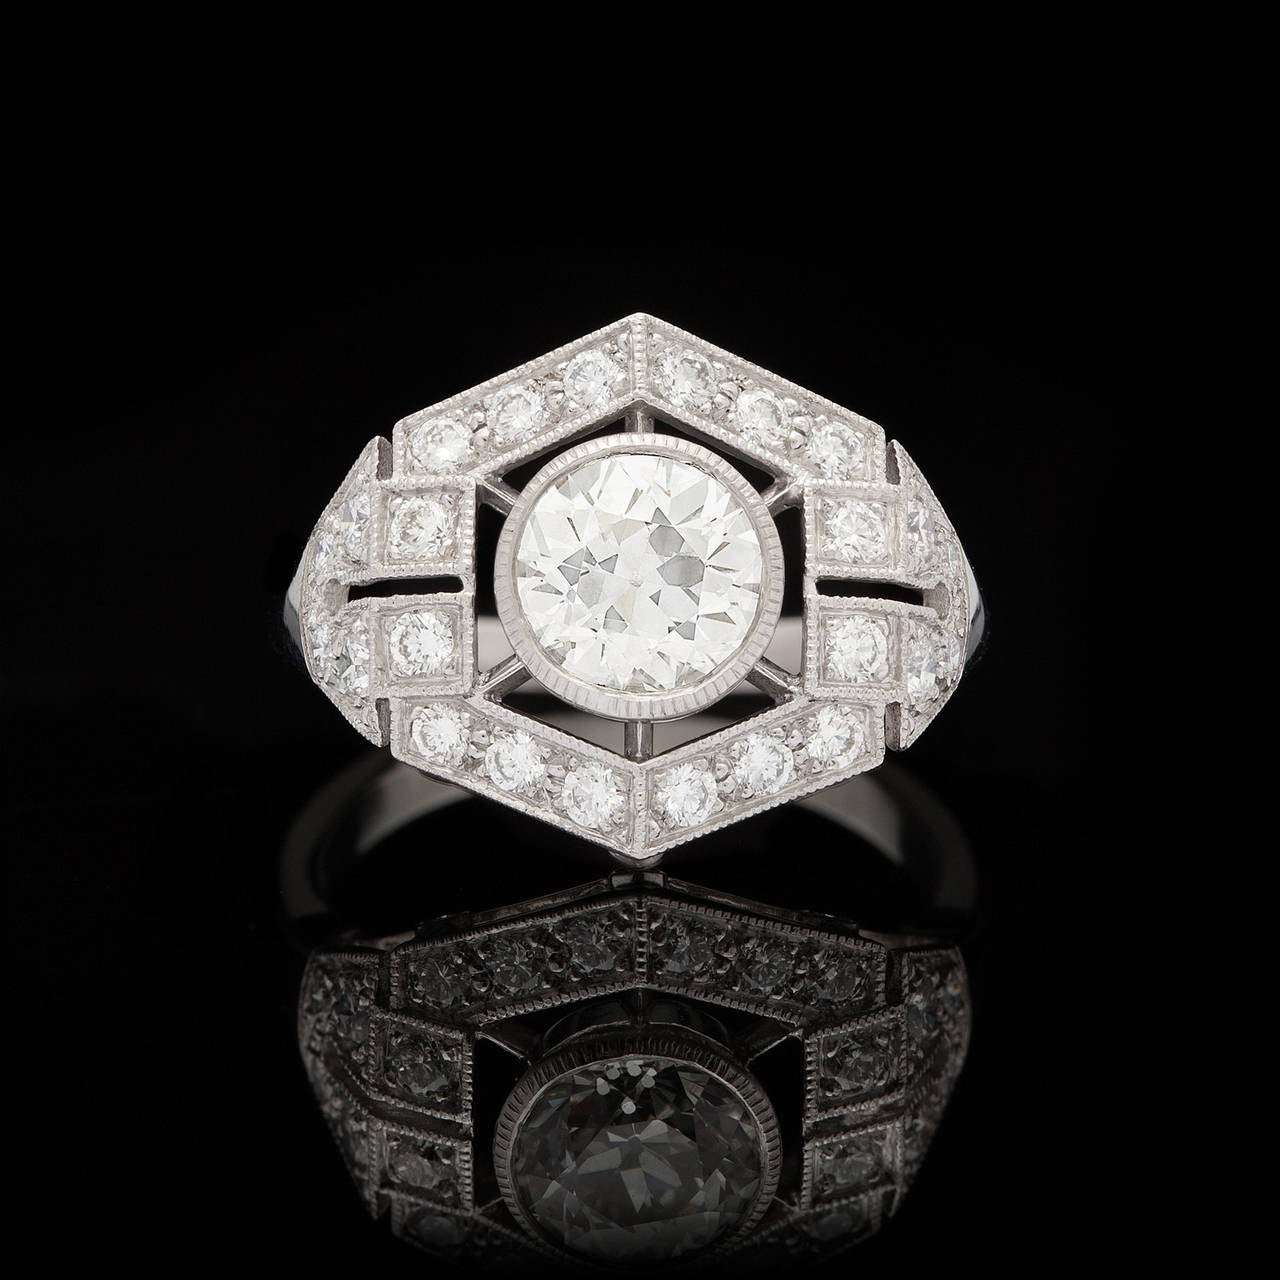 Sebastien Barier Ring Featuring One J Color and VS2 Clarity 1.33 Carat Old European Brilliant Cut Diamond in a Geometric Deco Style Setting, Complete with GIA Grading Report for the Center Stone. The design is accented with an additional 0.75-ctw of